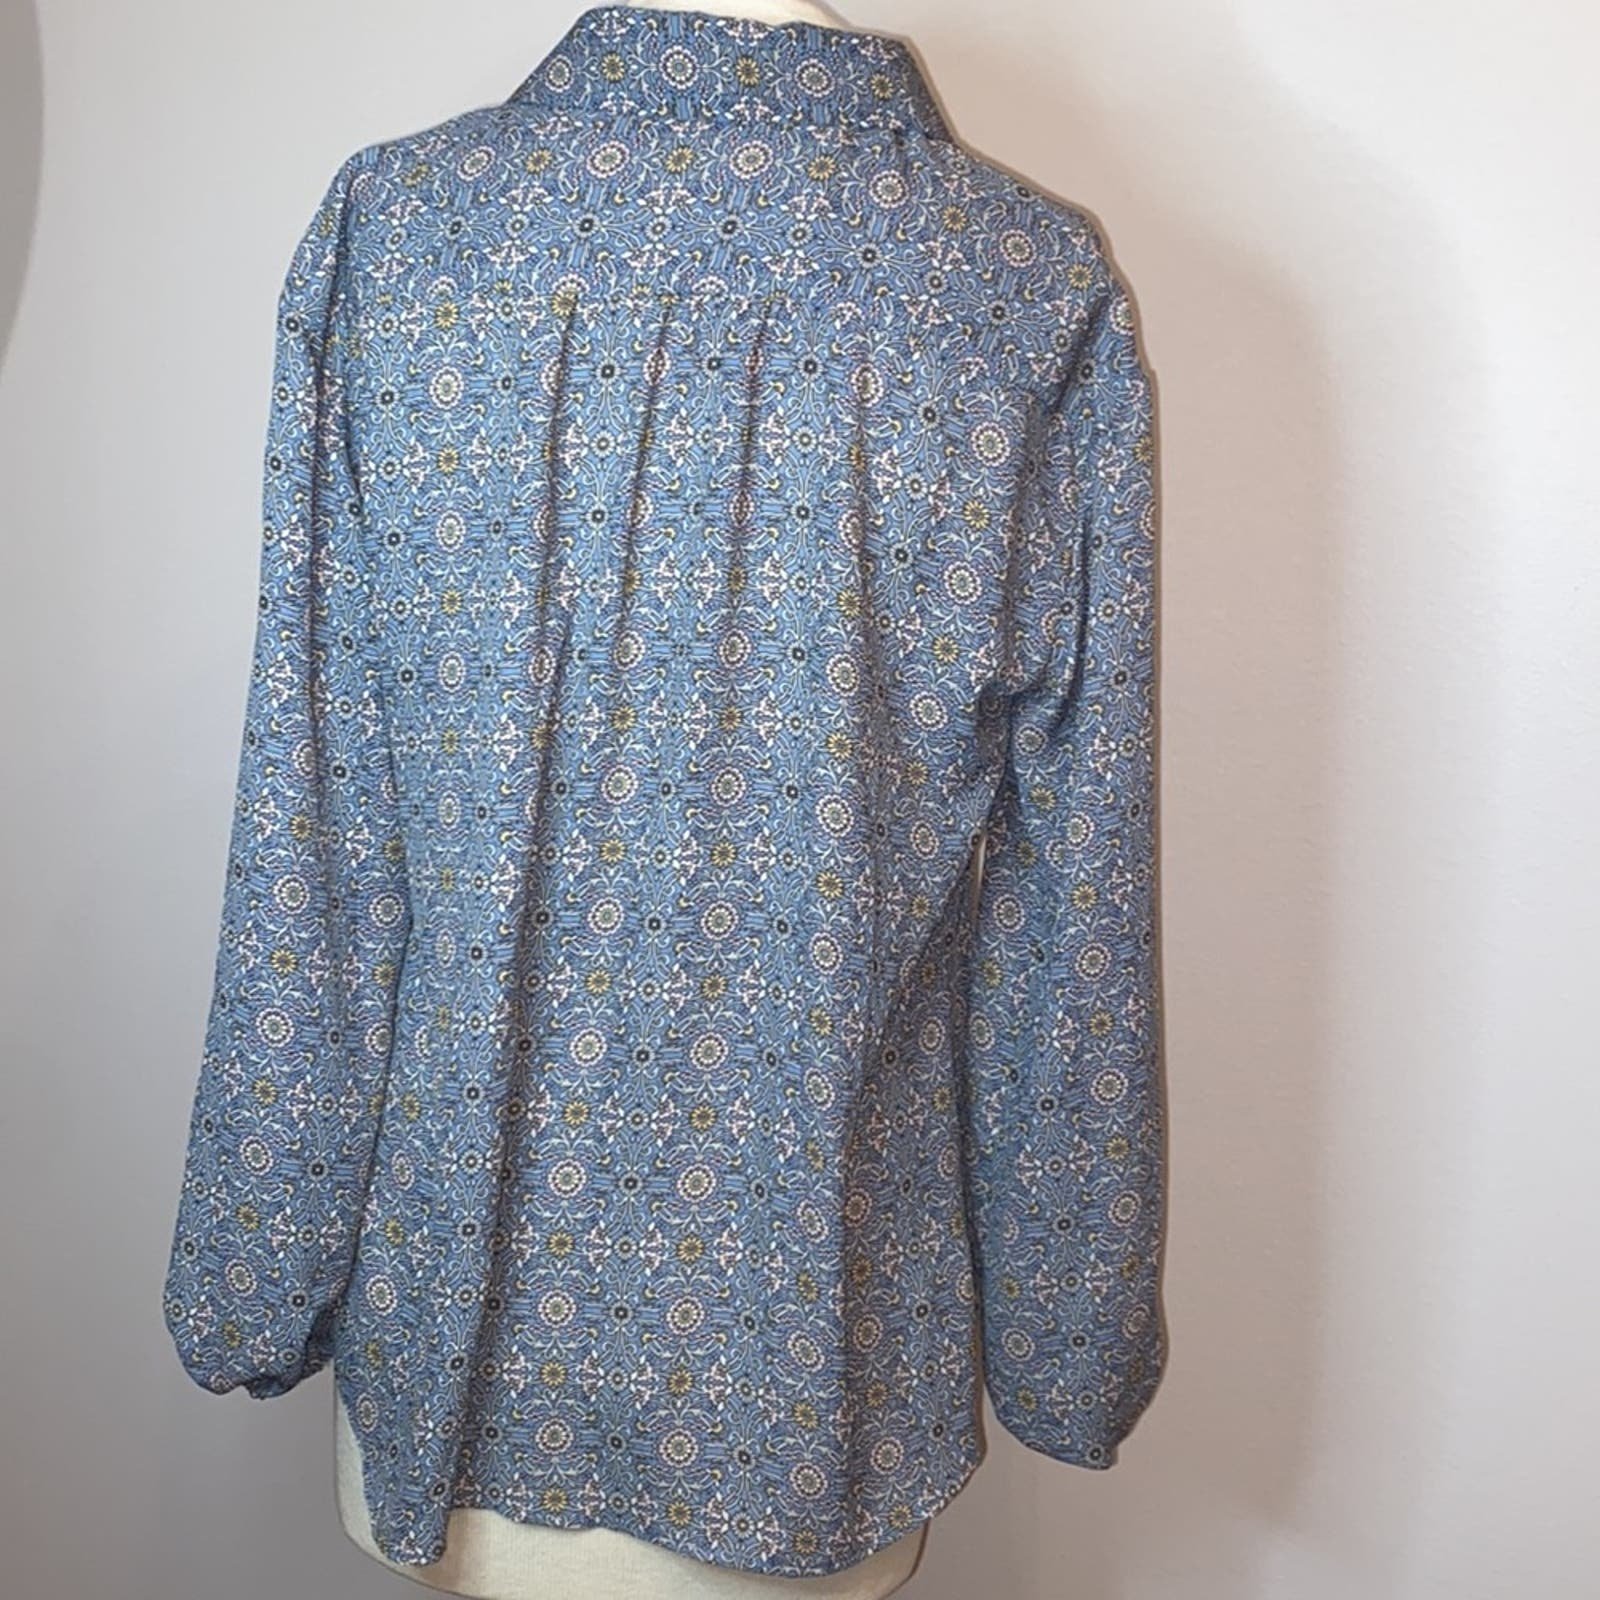 Buy Max Studio Small Blue Floral Crepe Long Sleeve Collar Shirt Lightweight Blouse nz7FYNY7R Online Exclusive